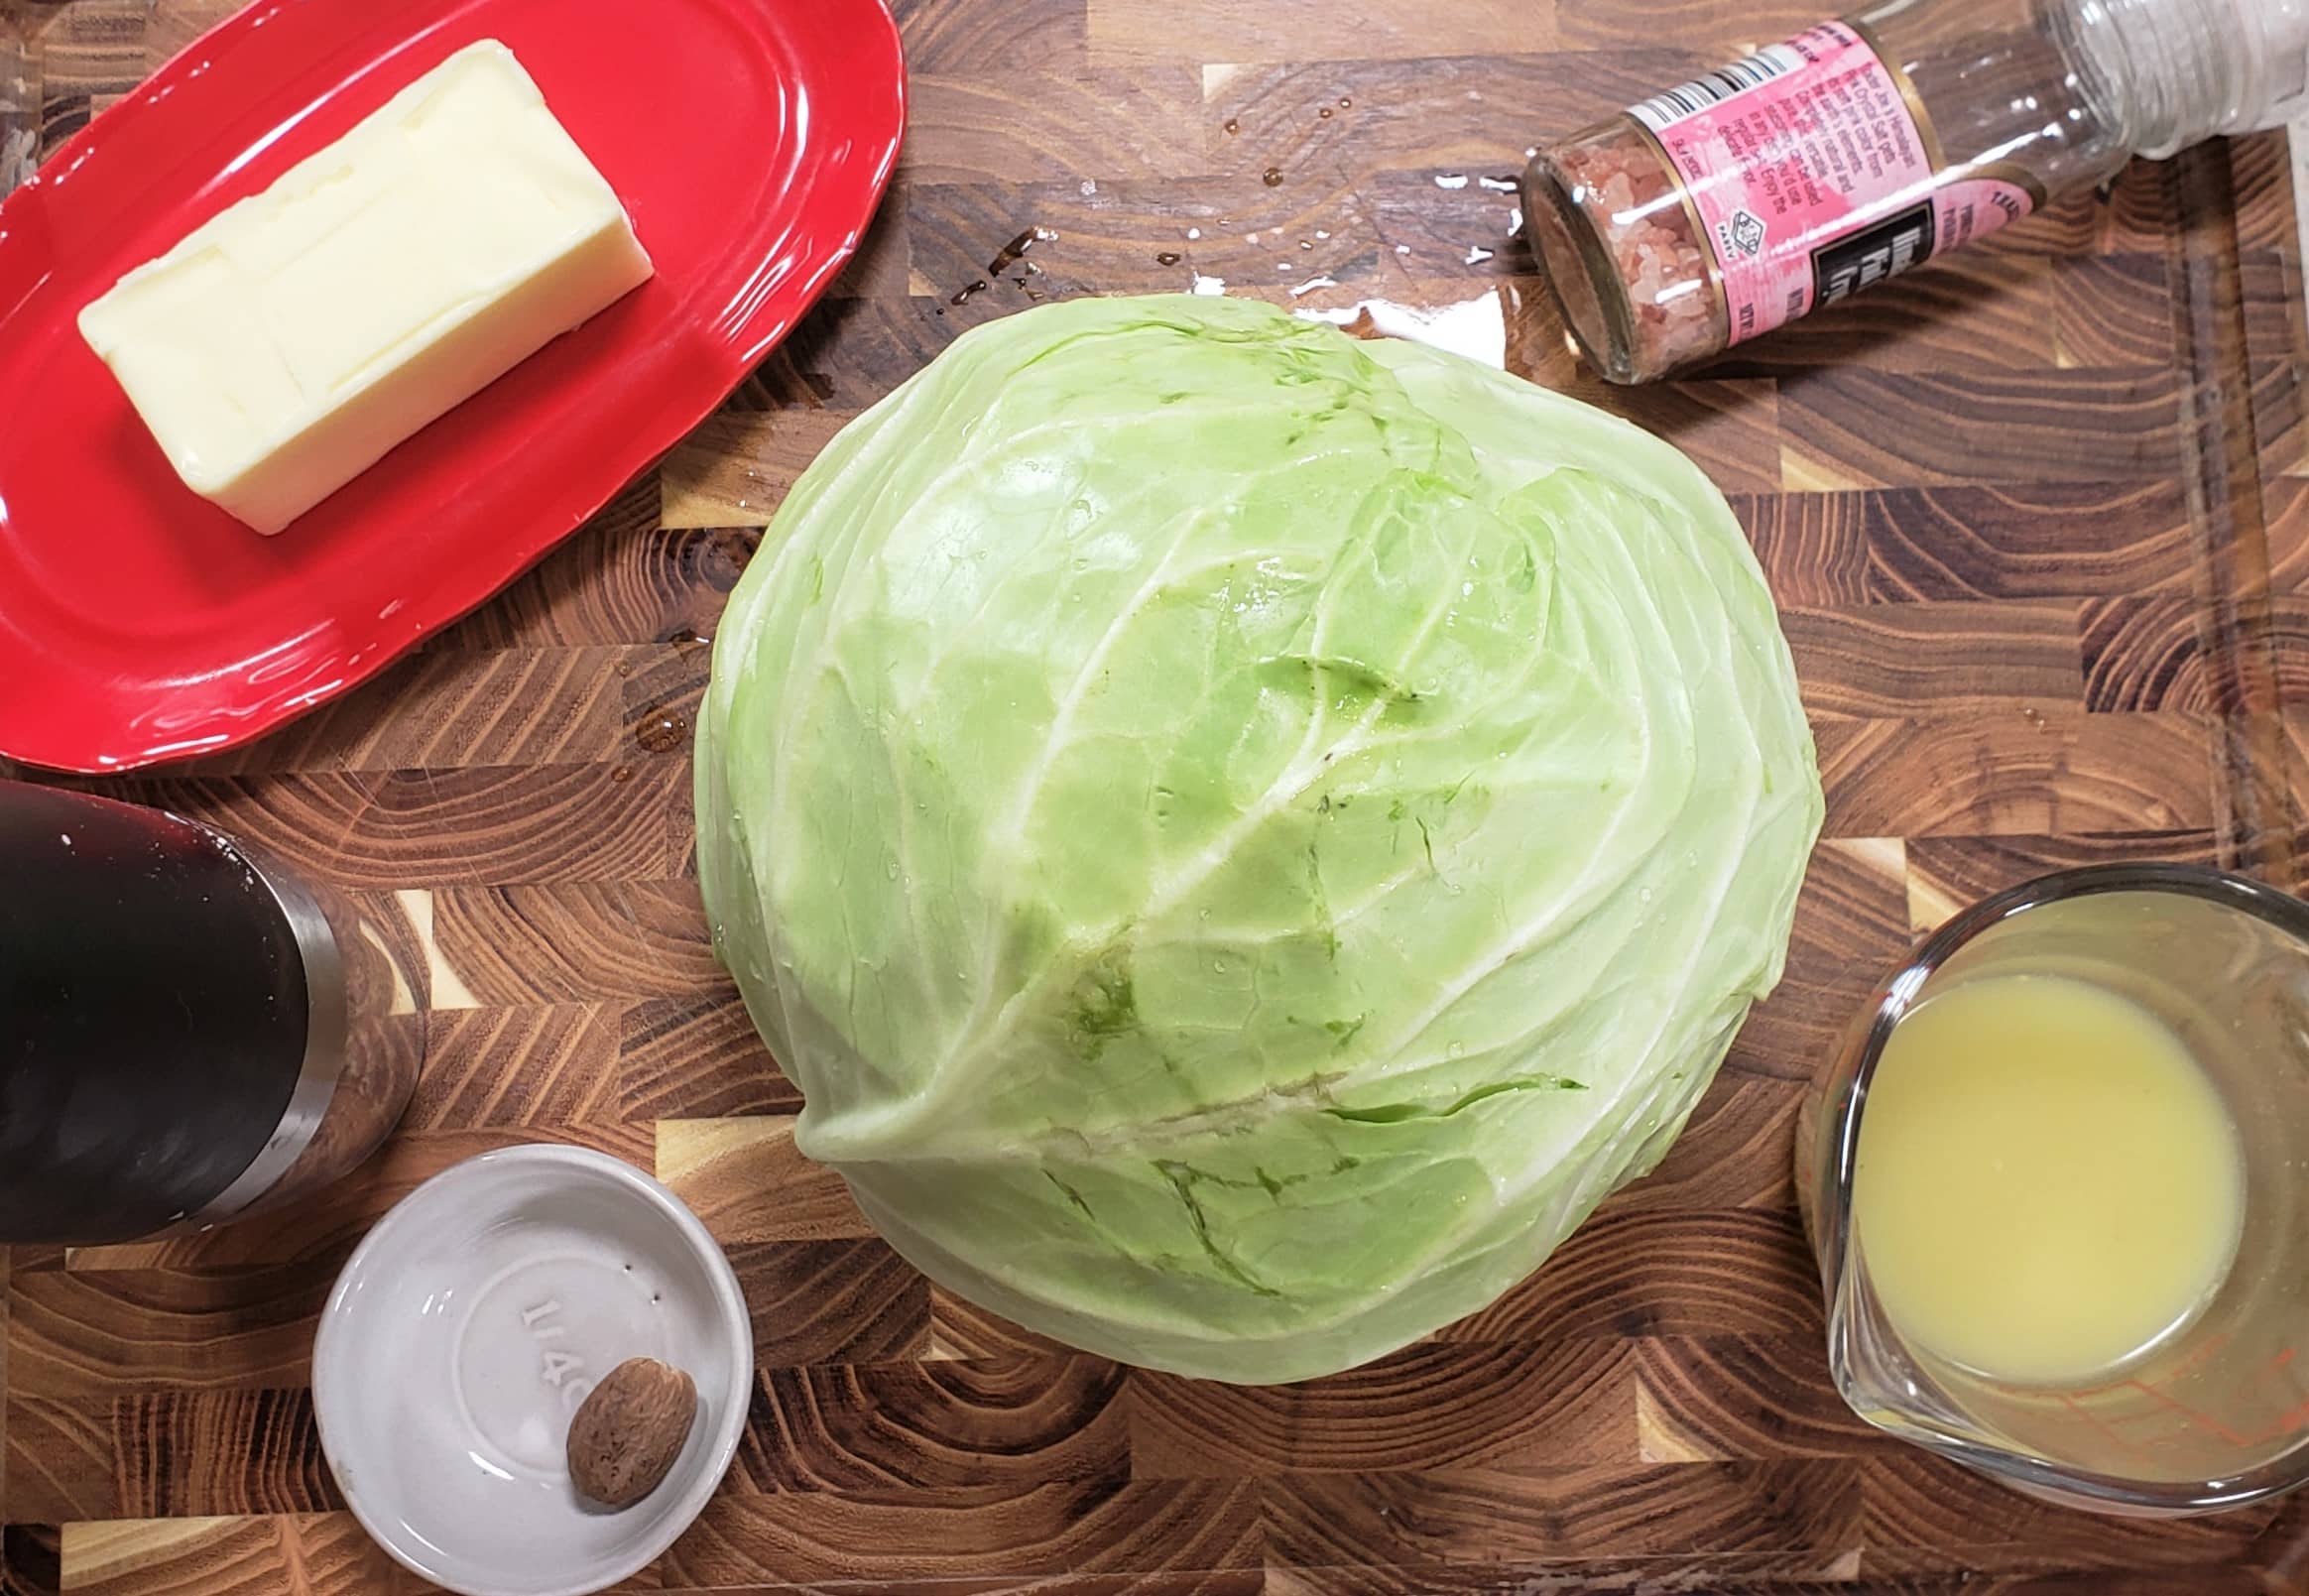 Ingredients for Instant Pot Buttered Cabbage on top of a wood cutting board. One head of cabbage, butter on a red butter dish, small white bowl with whole nutmeg, jar of Himalayan pink sea salt, glass measuring cup with chicken broth and black pepper grinder.